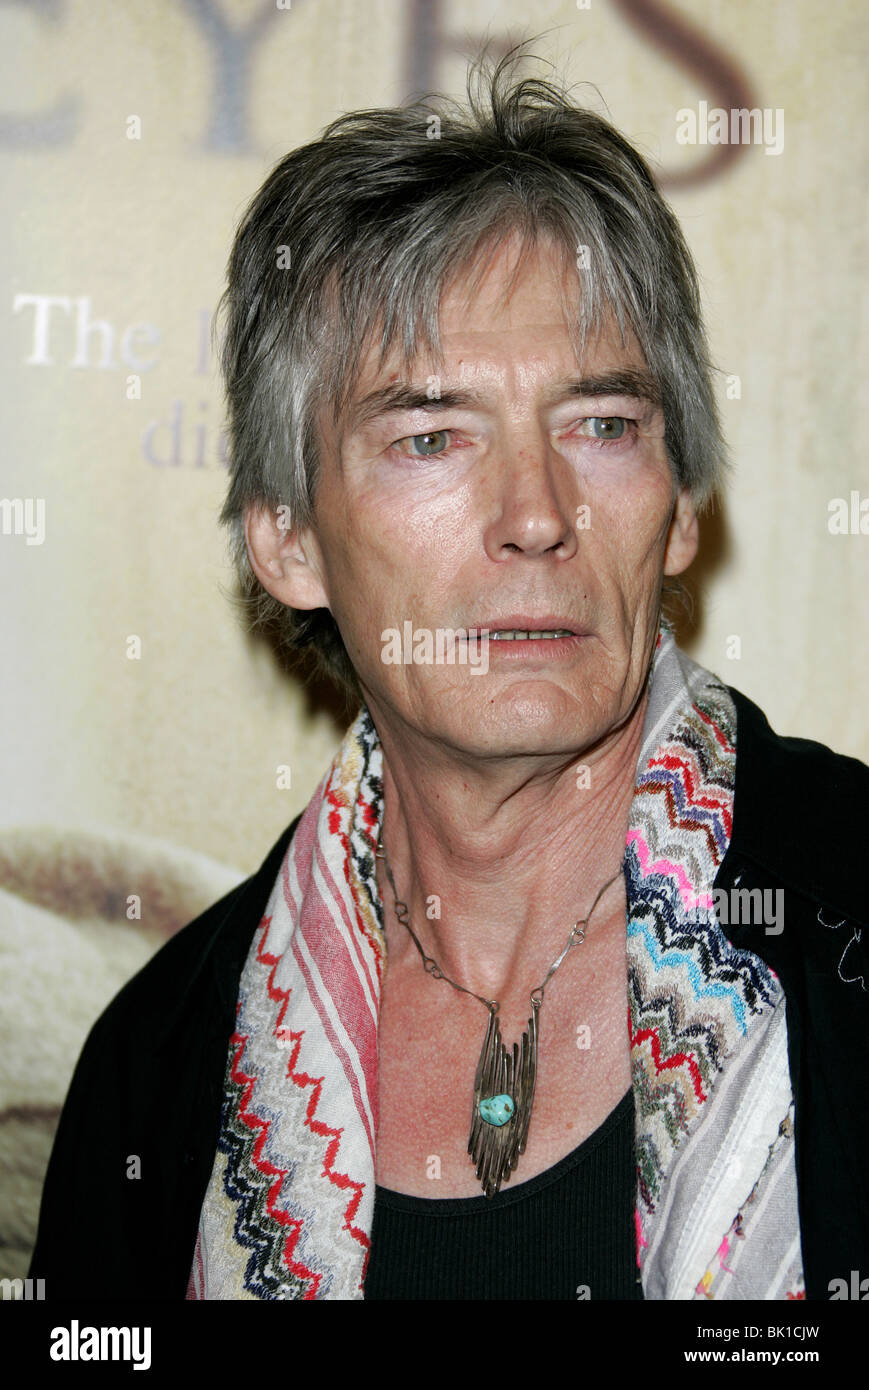 BILLY DRAGO THE HILLS HAVE eyes Augen PREMIERE ARCLIGHT HOLLYWOOD LOS ANGELES USA 9. März 2006 Stockfoto